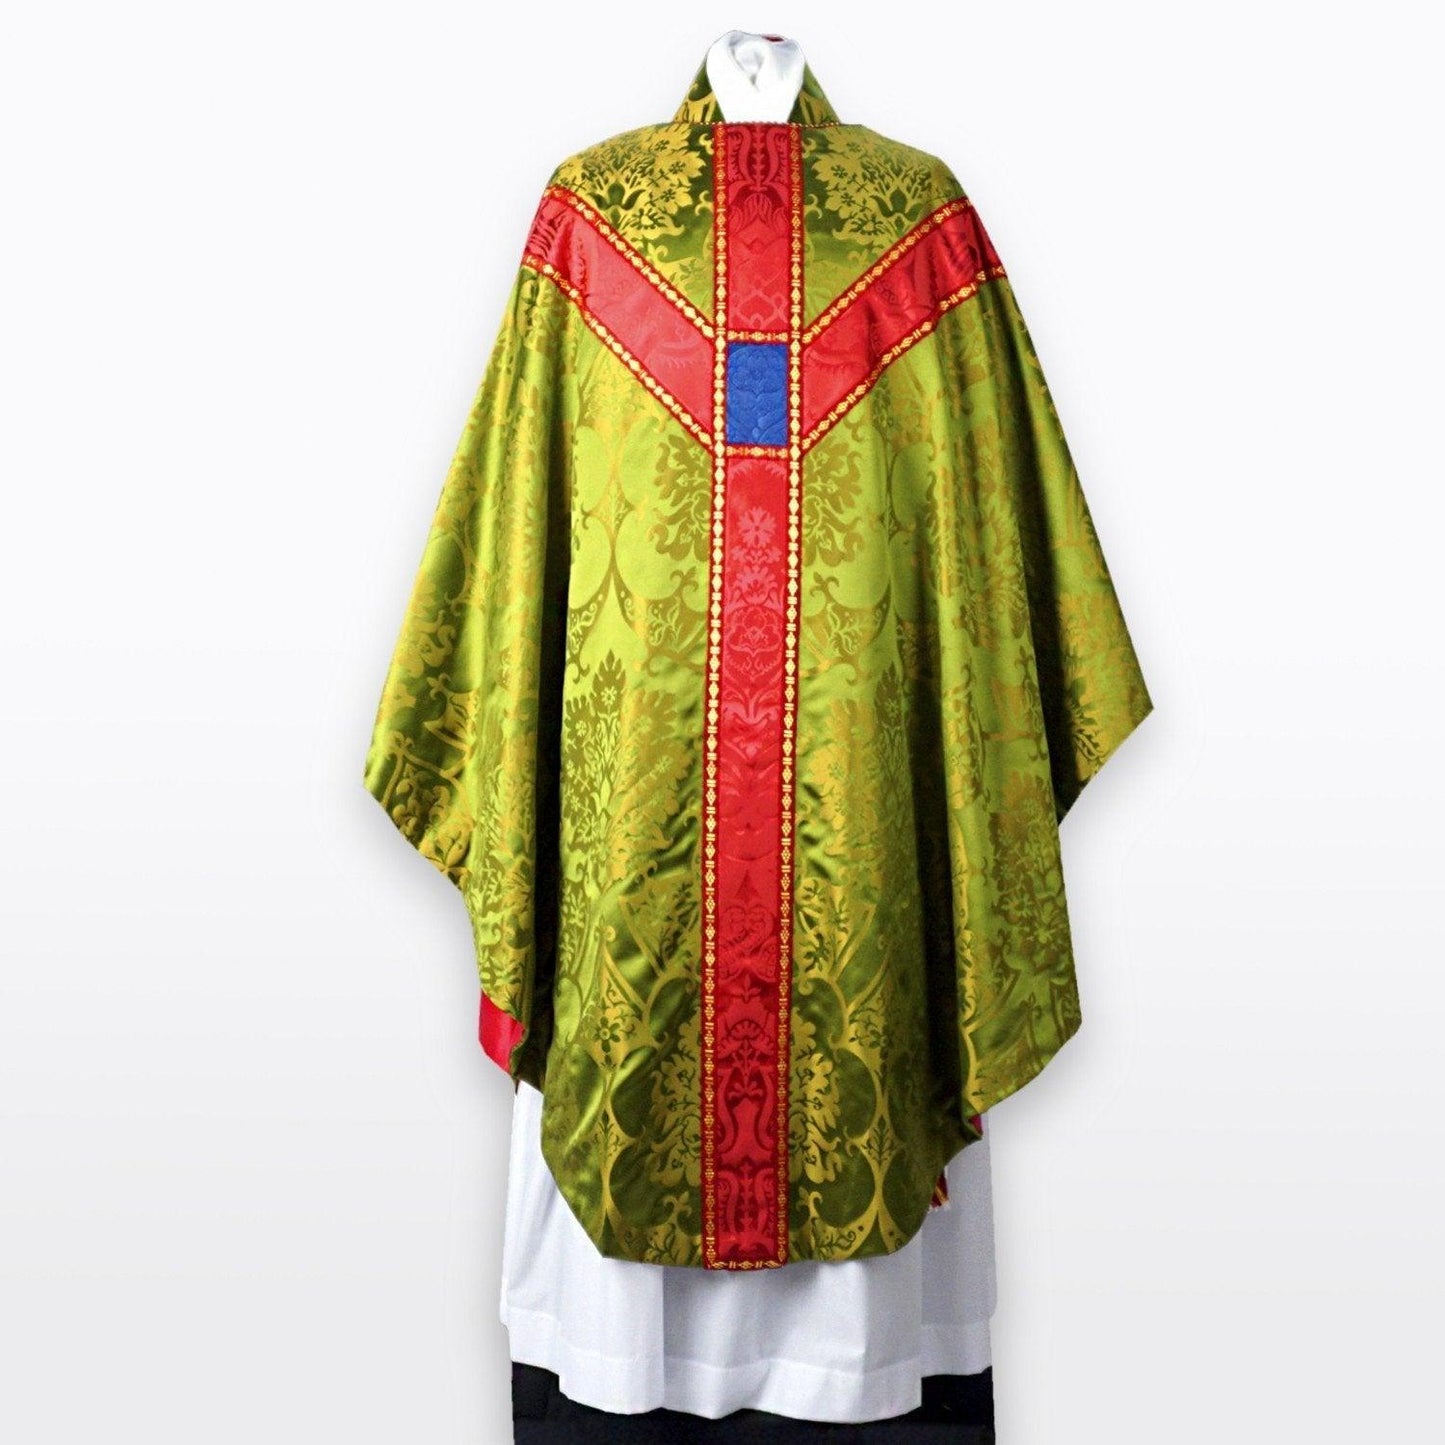 Full Gothic Chasuble in Green/Gold Gothic silk - Watts & Co. (international)